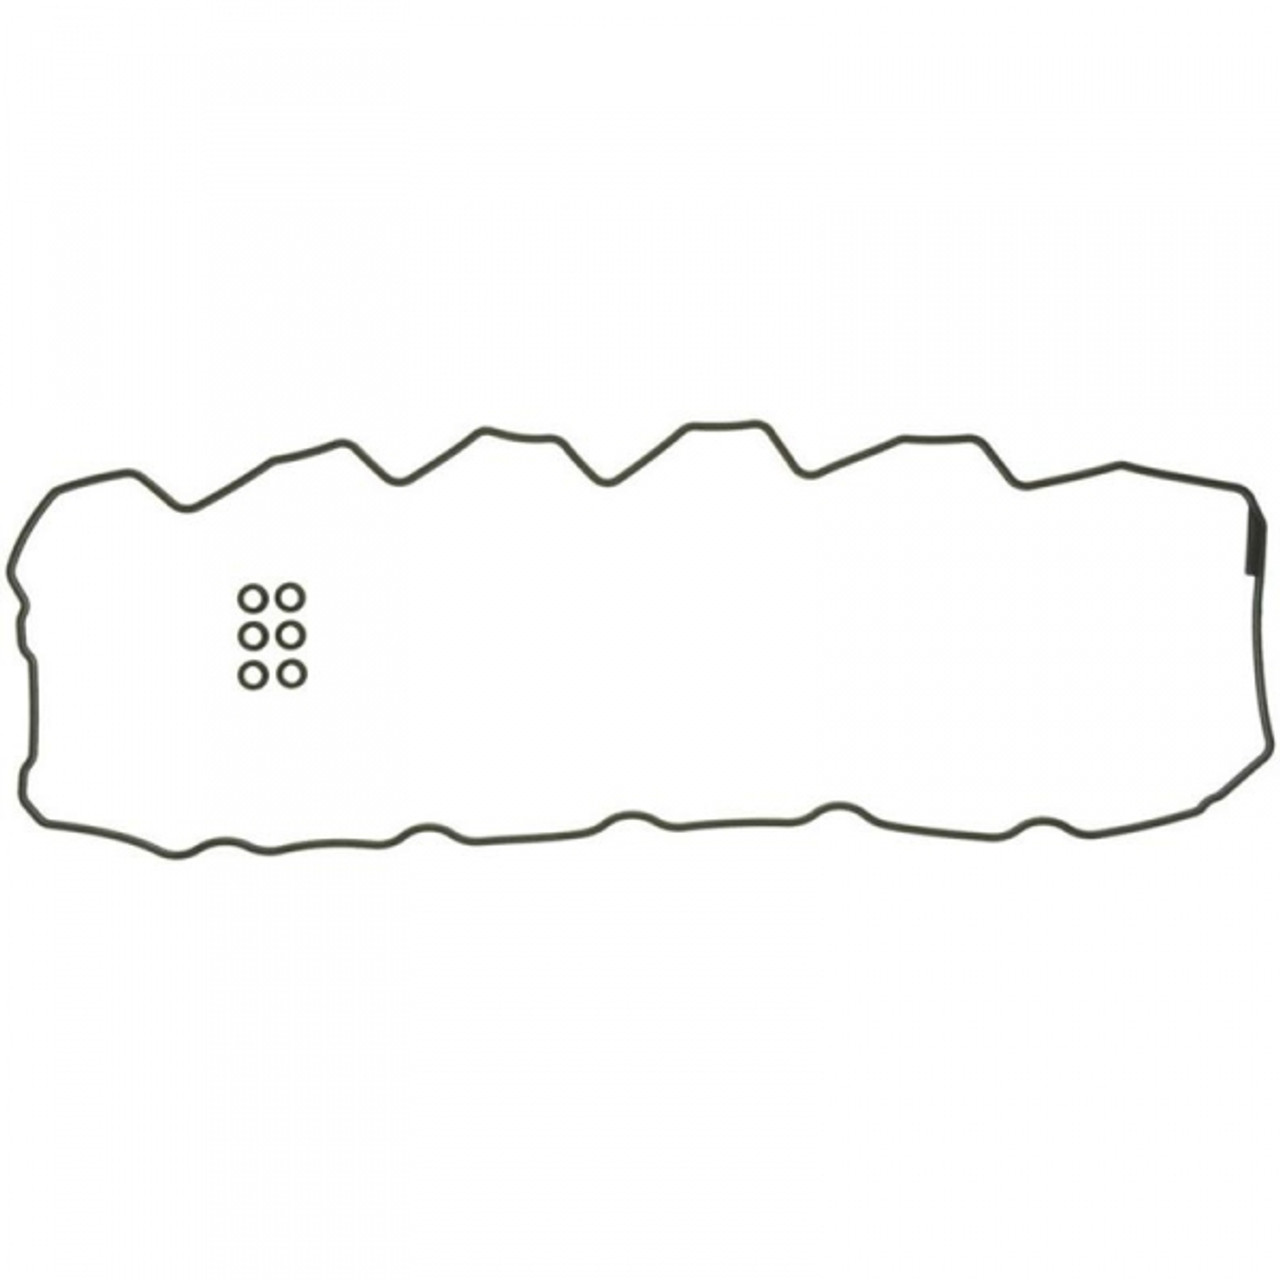 Mahle Valve Cover Gasket 2003 to 2005 5.9L Cummins (MCIVS50416)-Main View